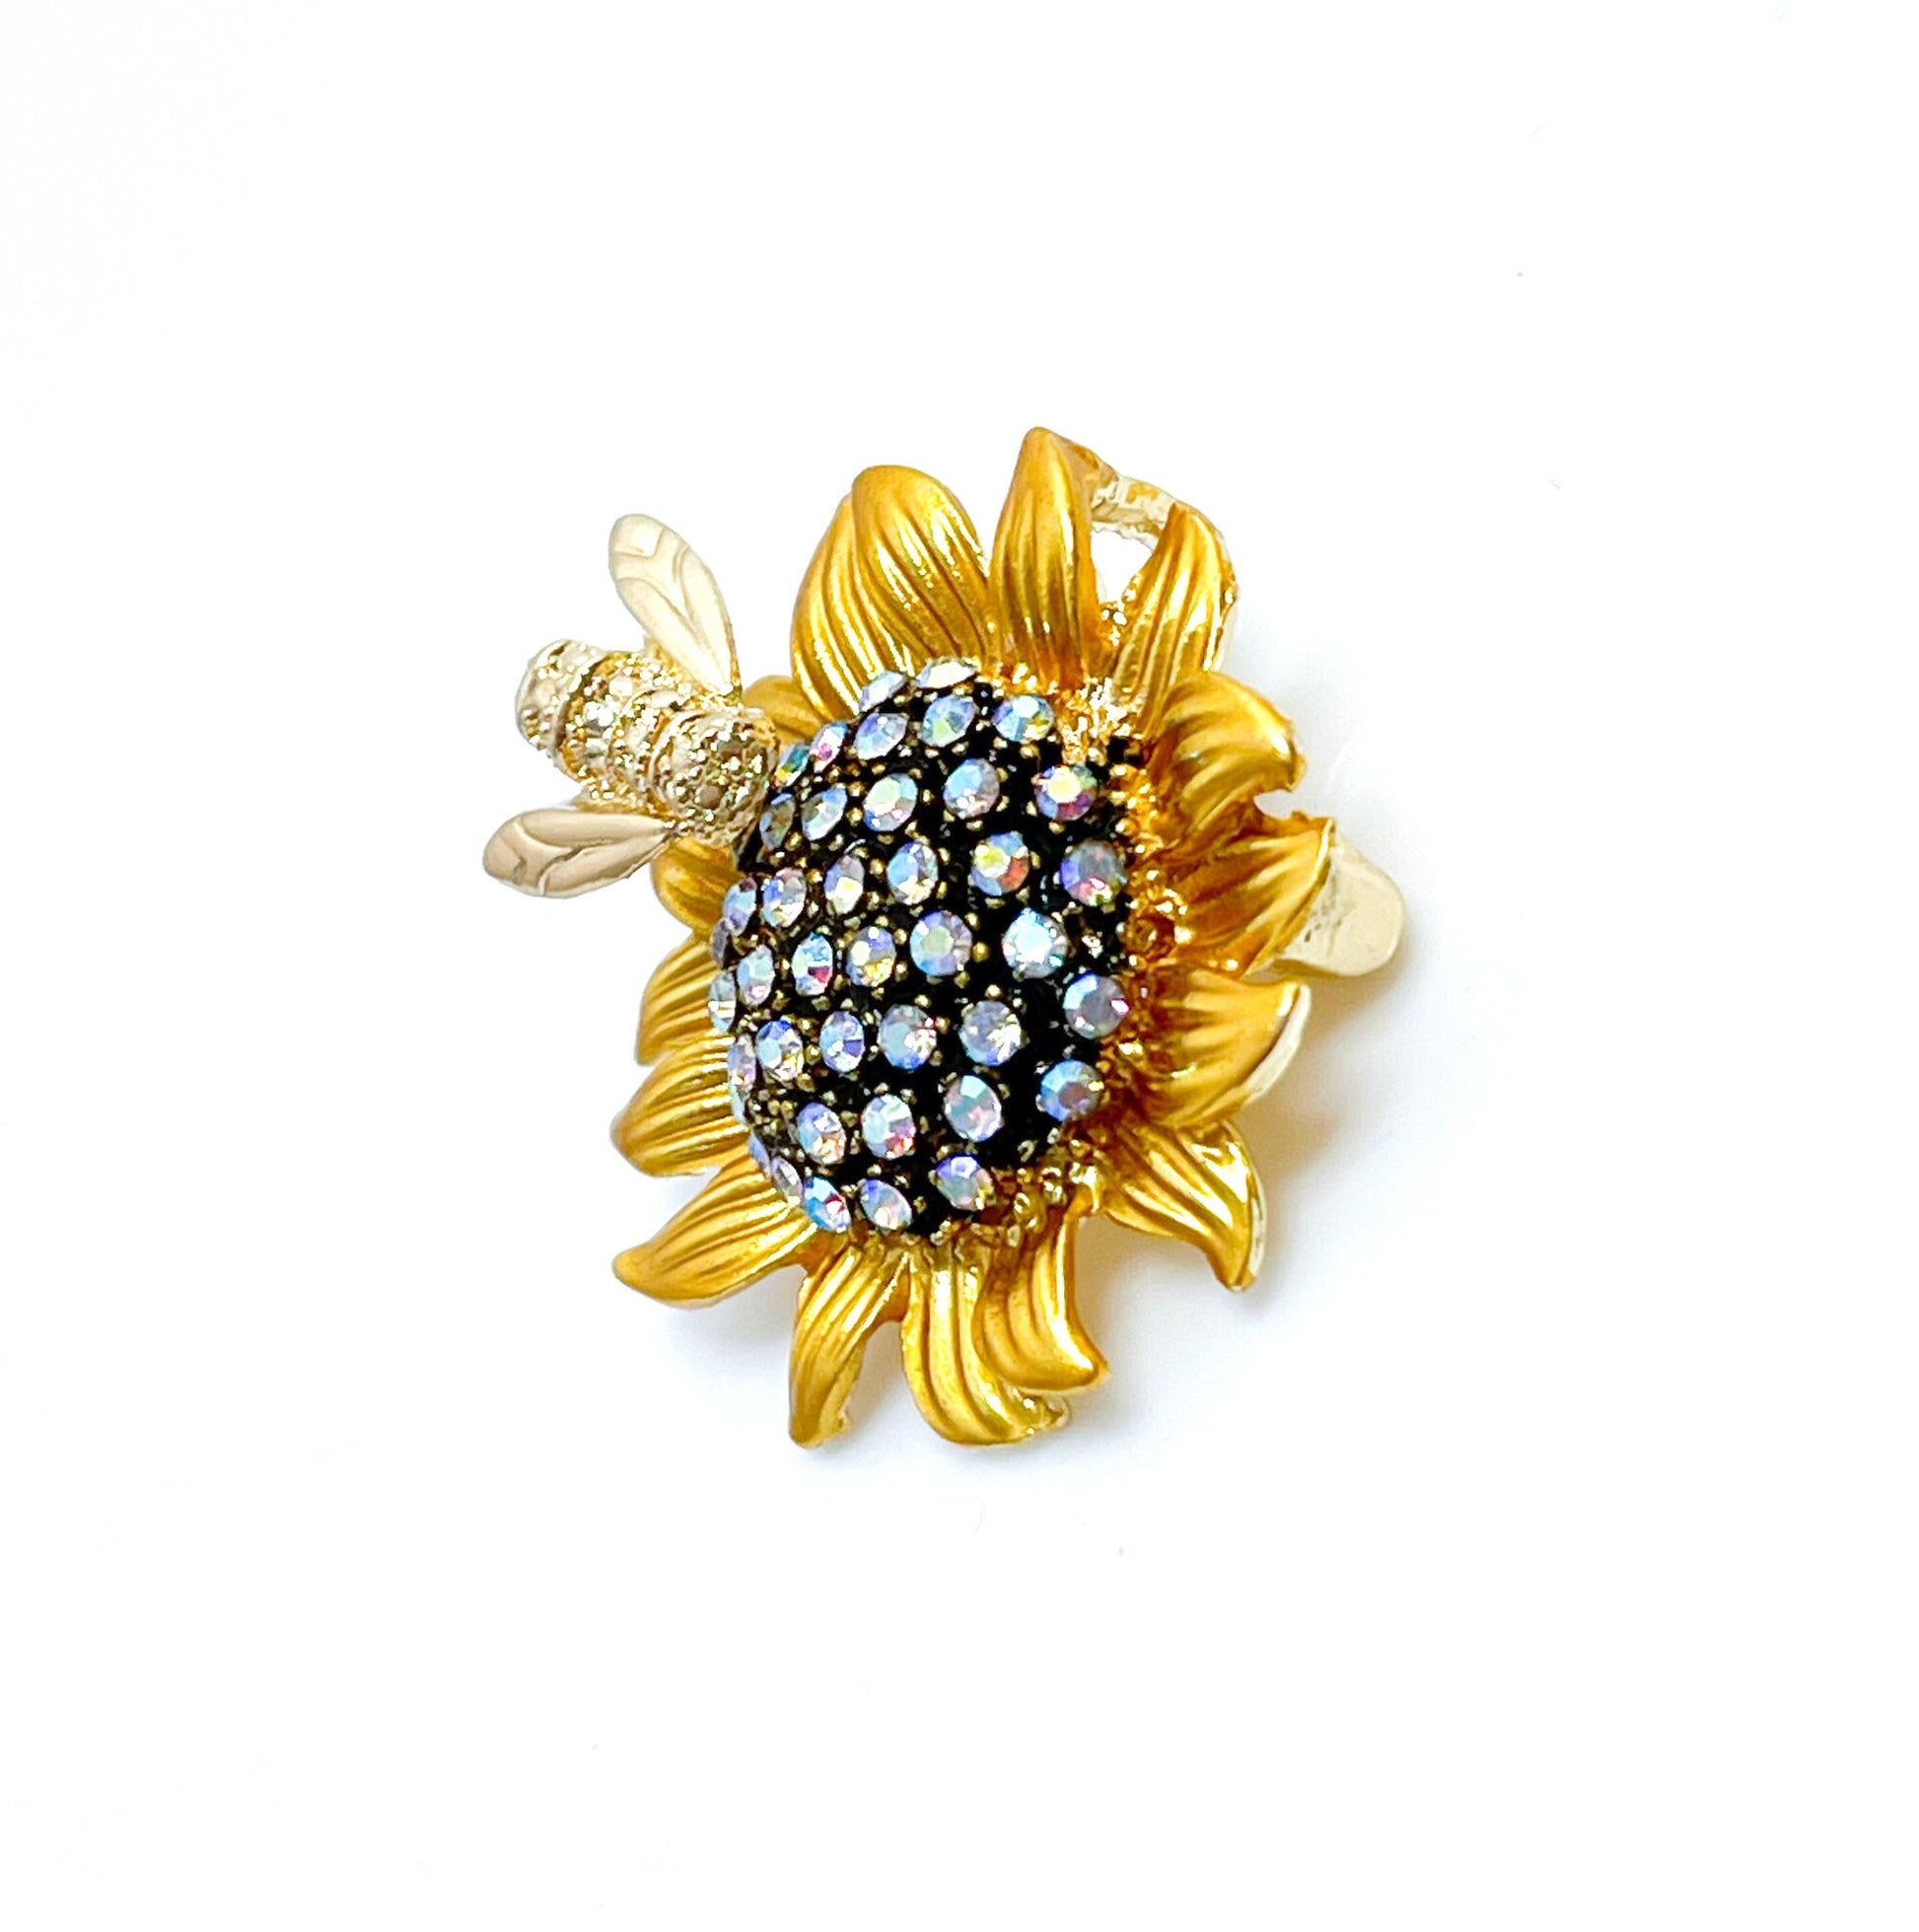 Vintage Sunflower with Bee Brooch, Gold Flower Pin, Flower Jacket Pin, Glittery Scarf Pin, Brooches For Women